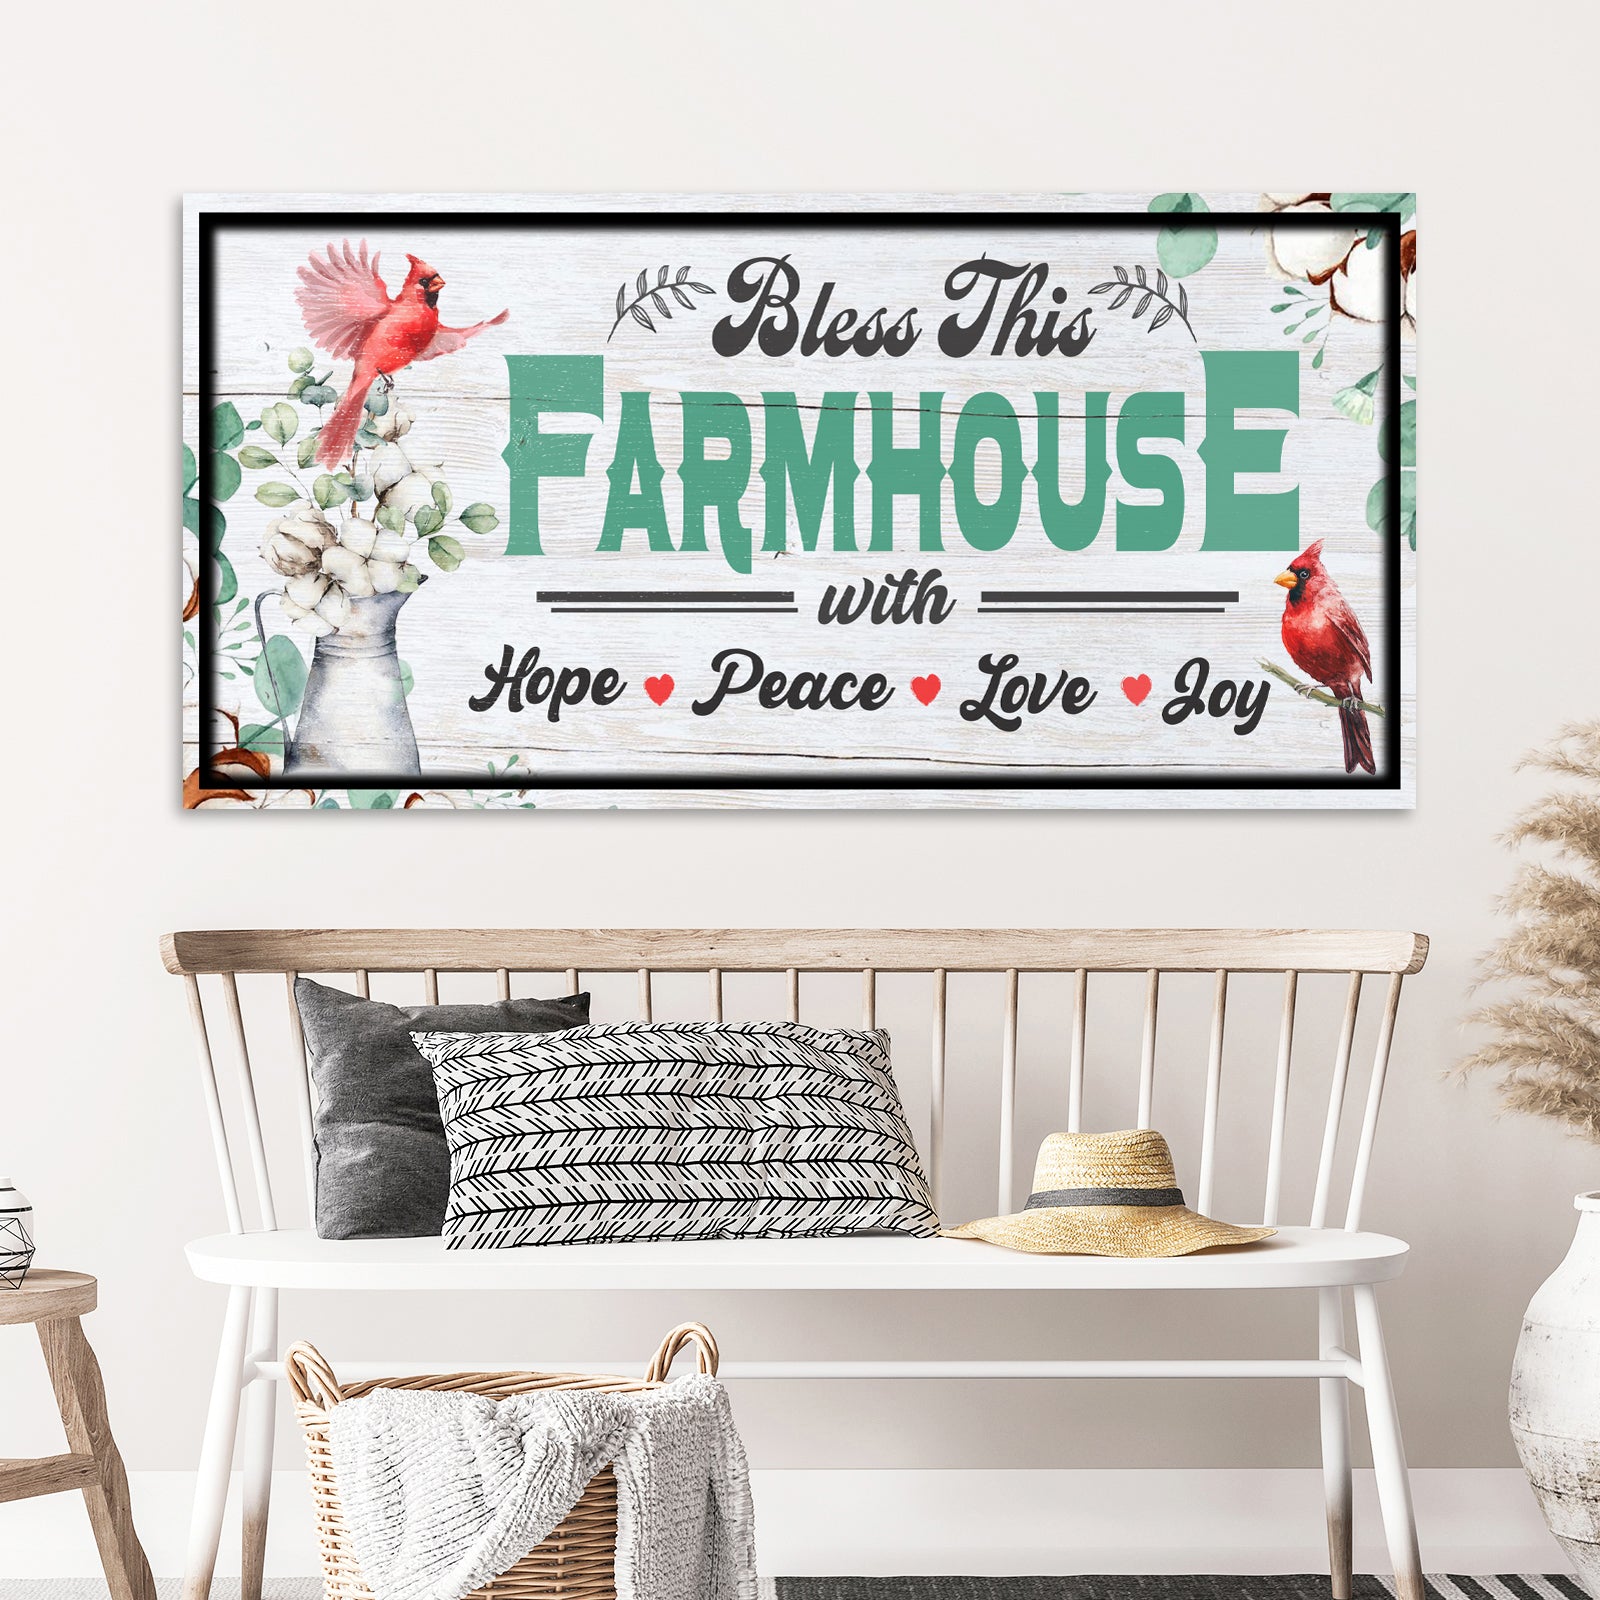 Bless this Farmhouse with Hope, Peace, Love, Joy (Ready to hang) - Wall Art Image by Tailored Canvases